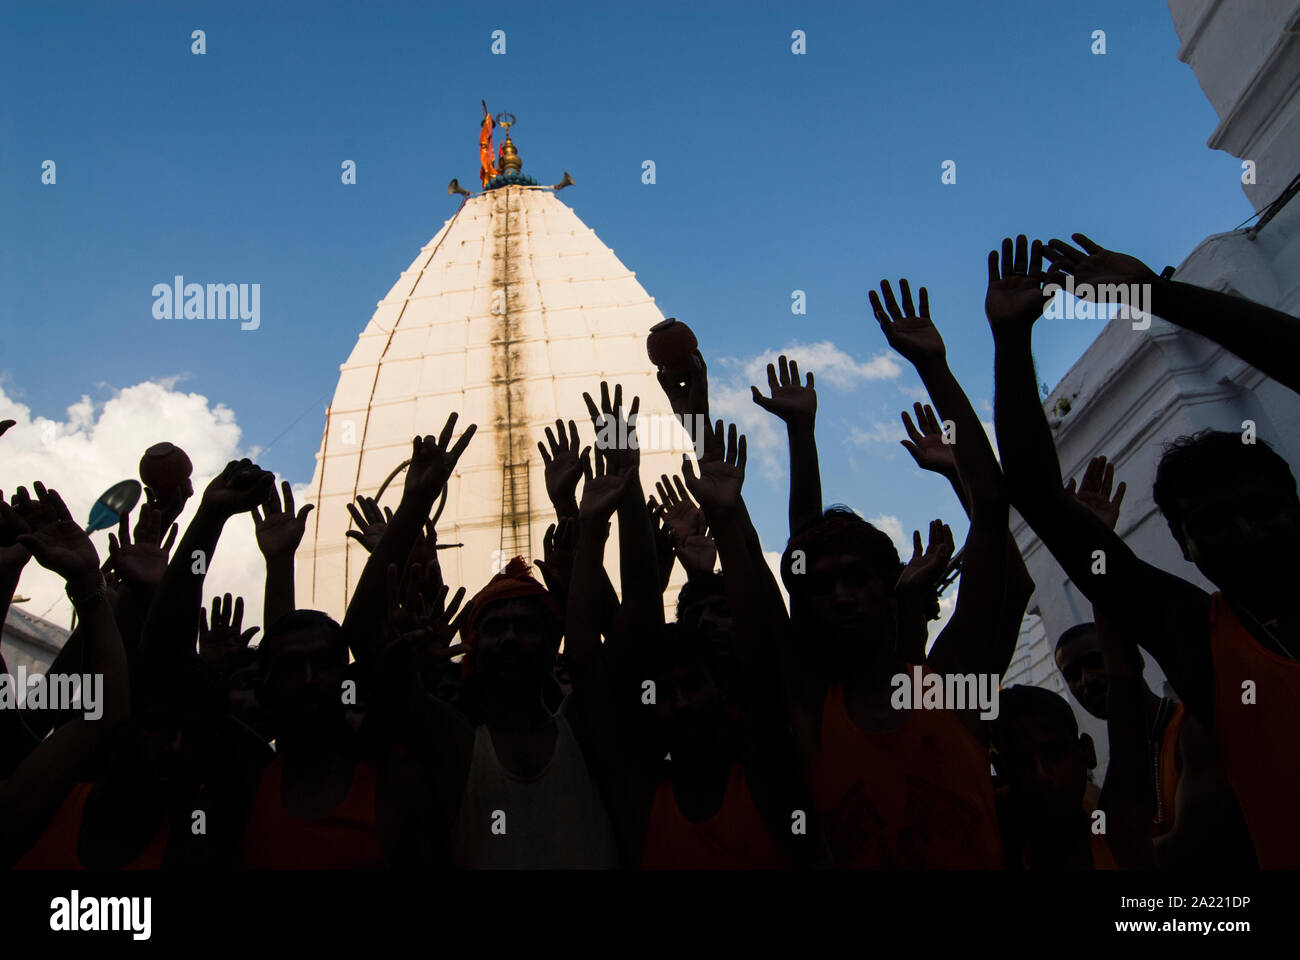 INDIA Jharkhand Deogarh , Hindu pilgrims at Shiva temple during annual festival , it is one of the holy places with a Jyothi lingam, a Phallus symbol of Hindu god Shiva / INDIEN  Jharkhand Deogarh , Hindus besuchen das Tempelfest am Shiva Tempel wo sich ein Jyothi lingam befindet Stock Photo